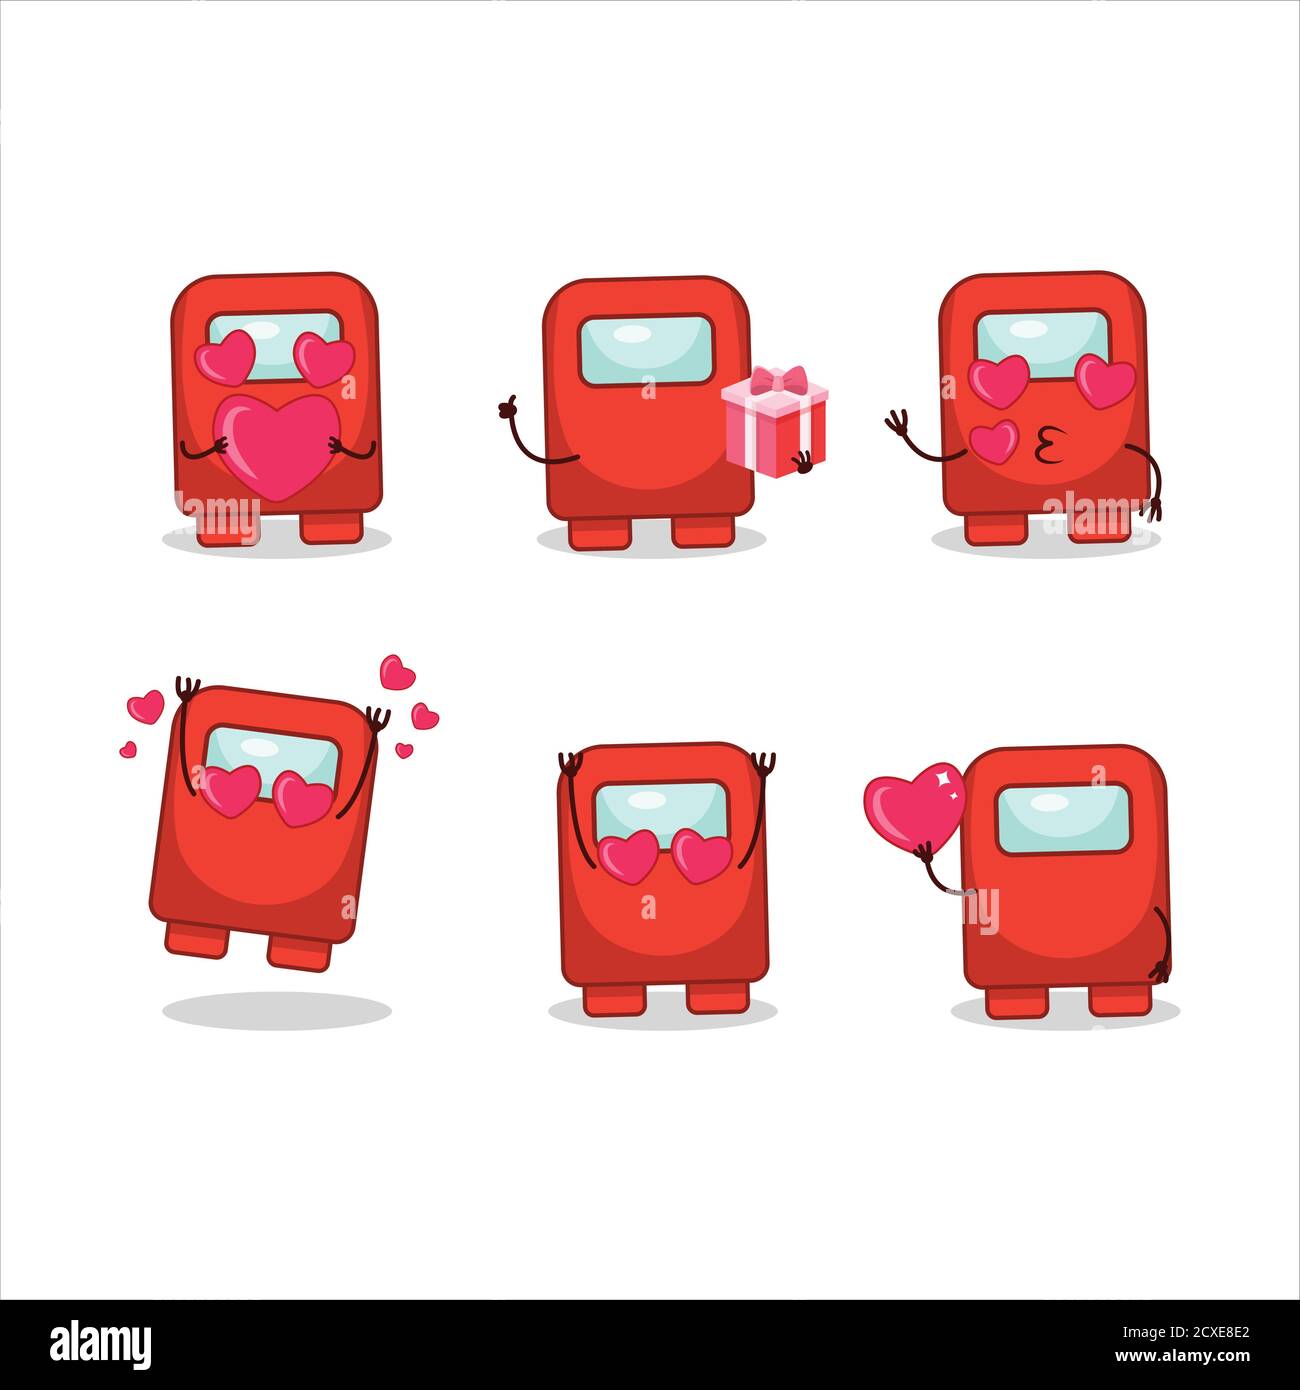 Among us red cartoon character with love cute emoticon Stock Vector